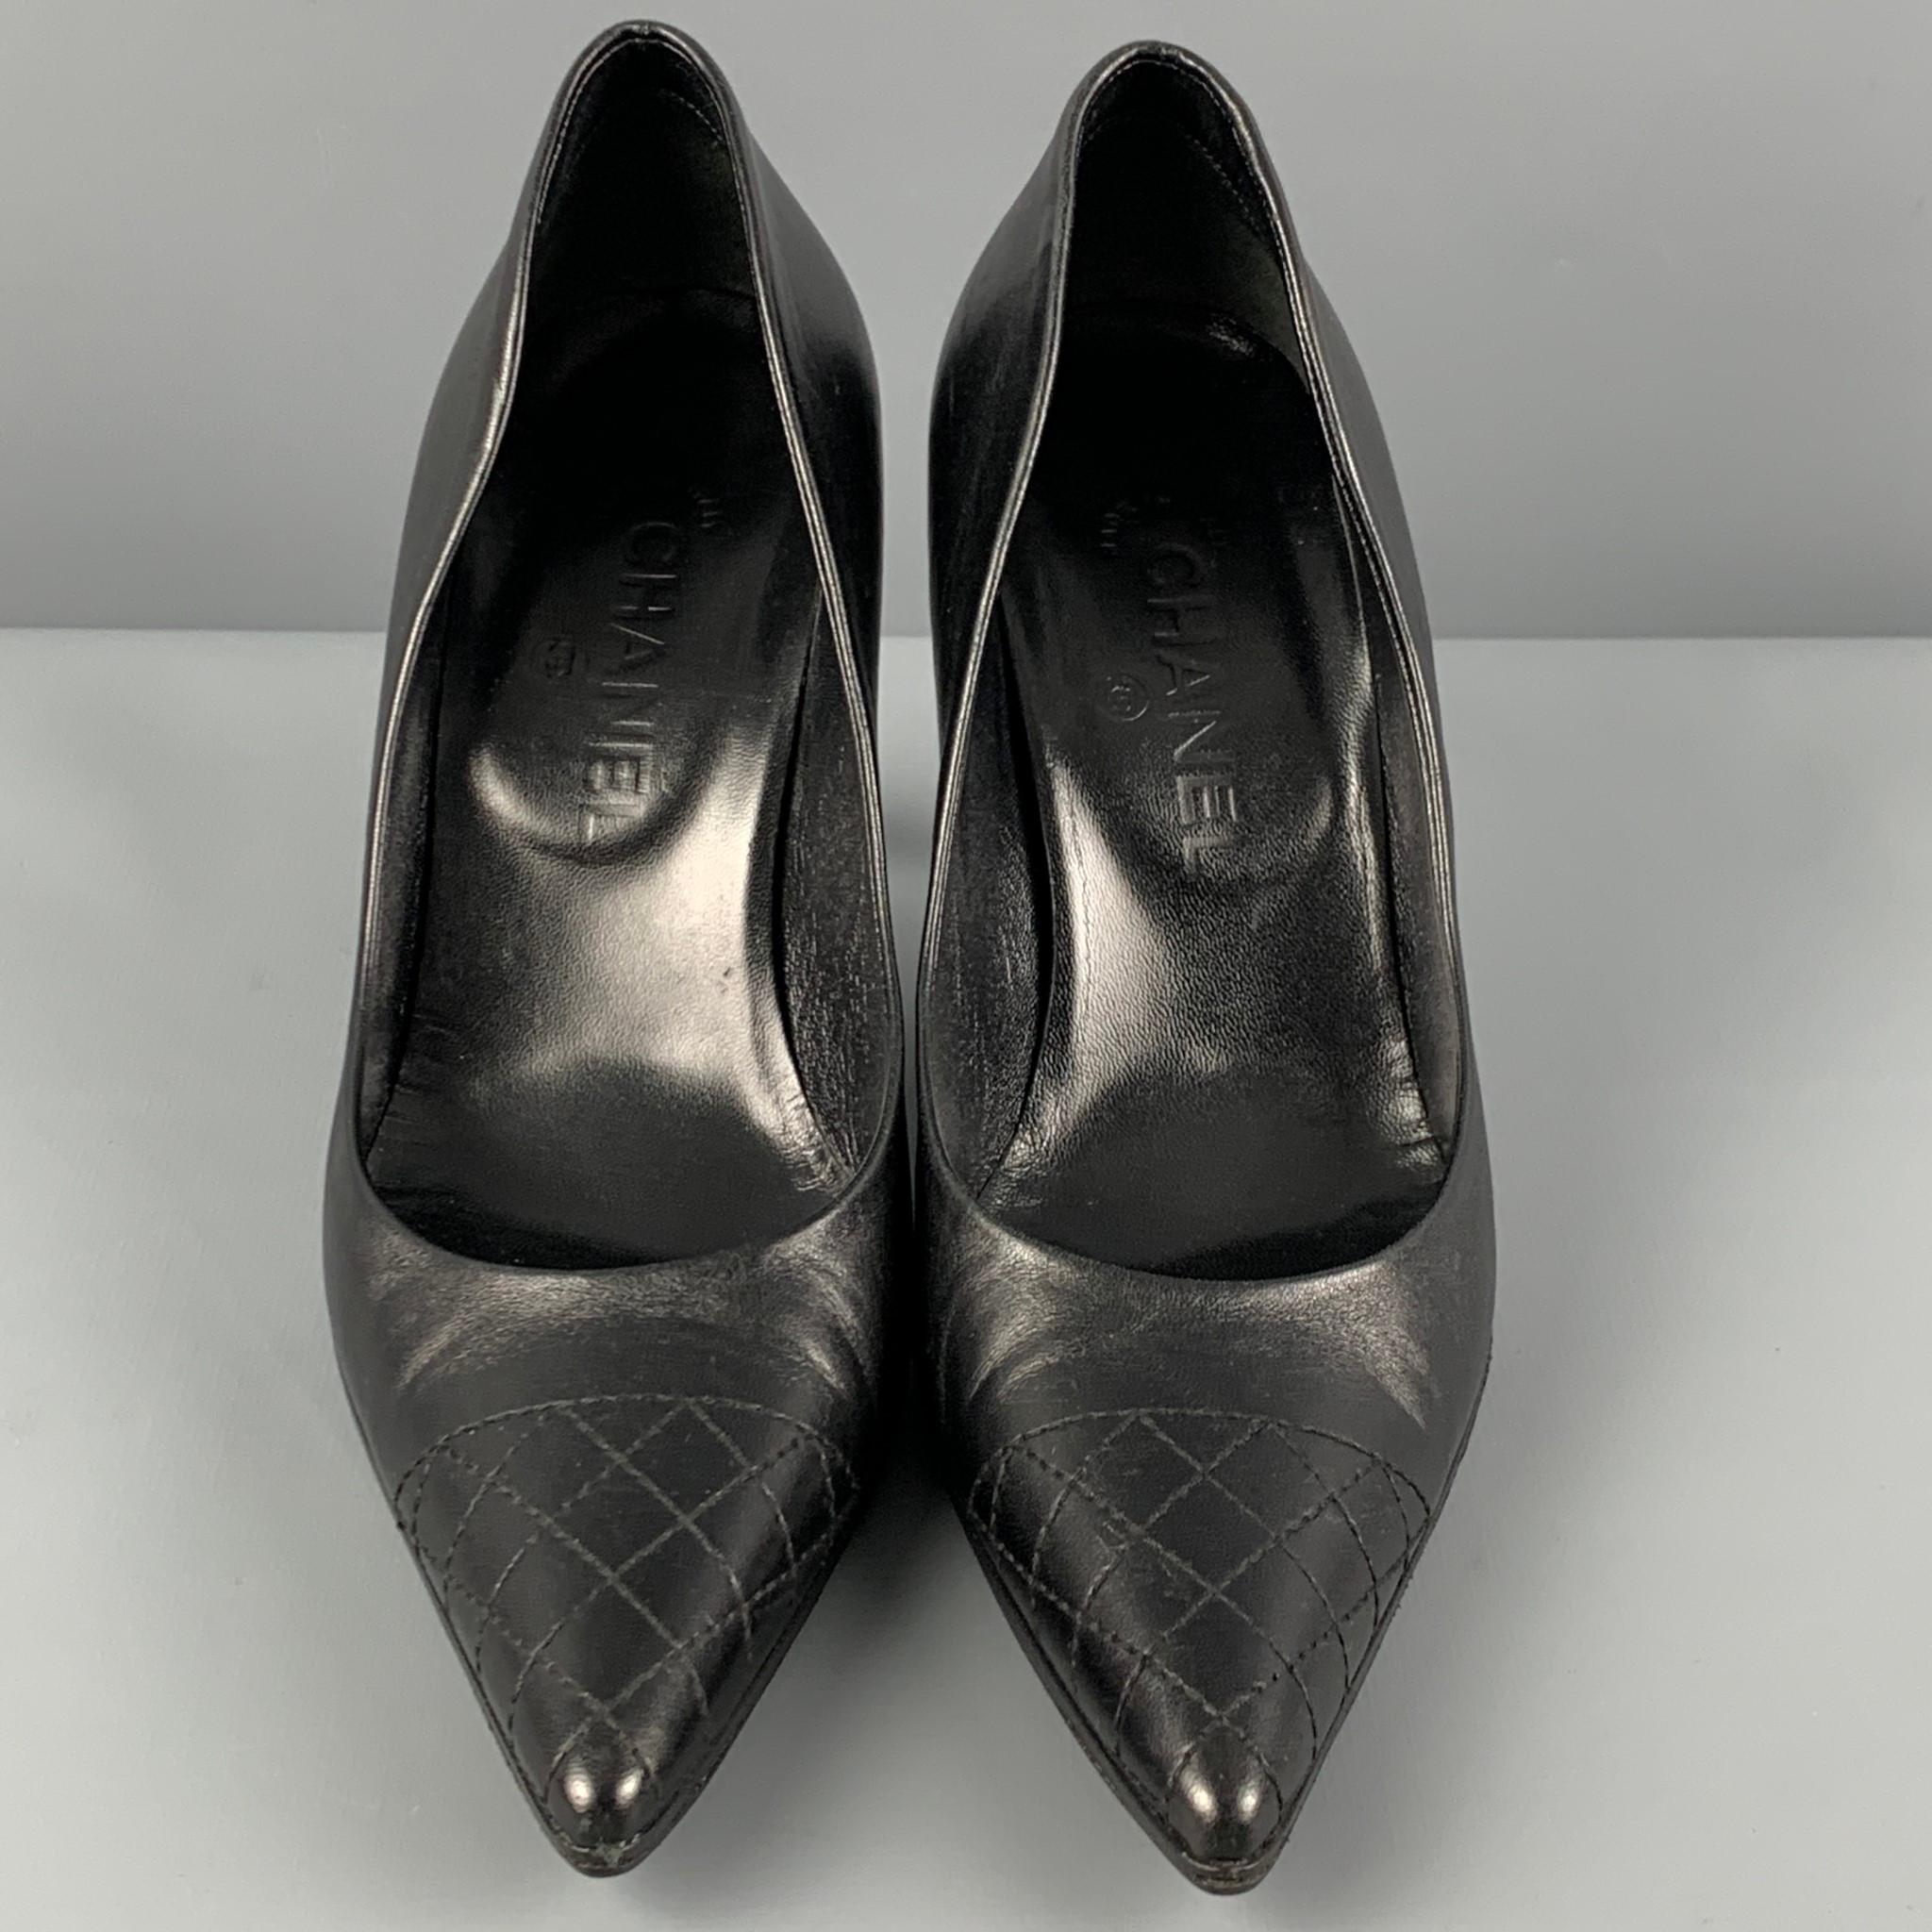 Women's CHANEL Size 7 Black Leather Pointed Toe Pumps